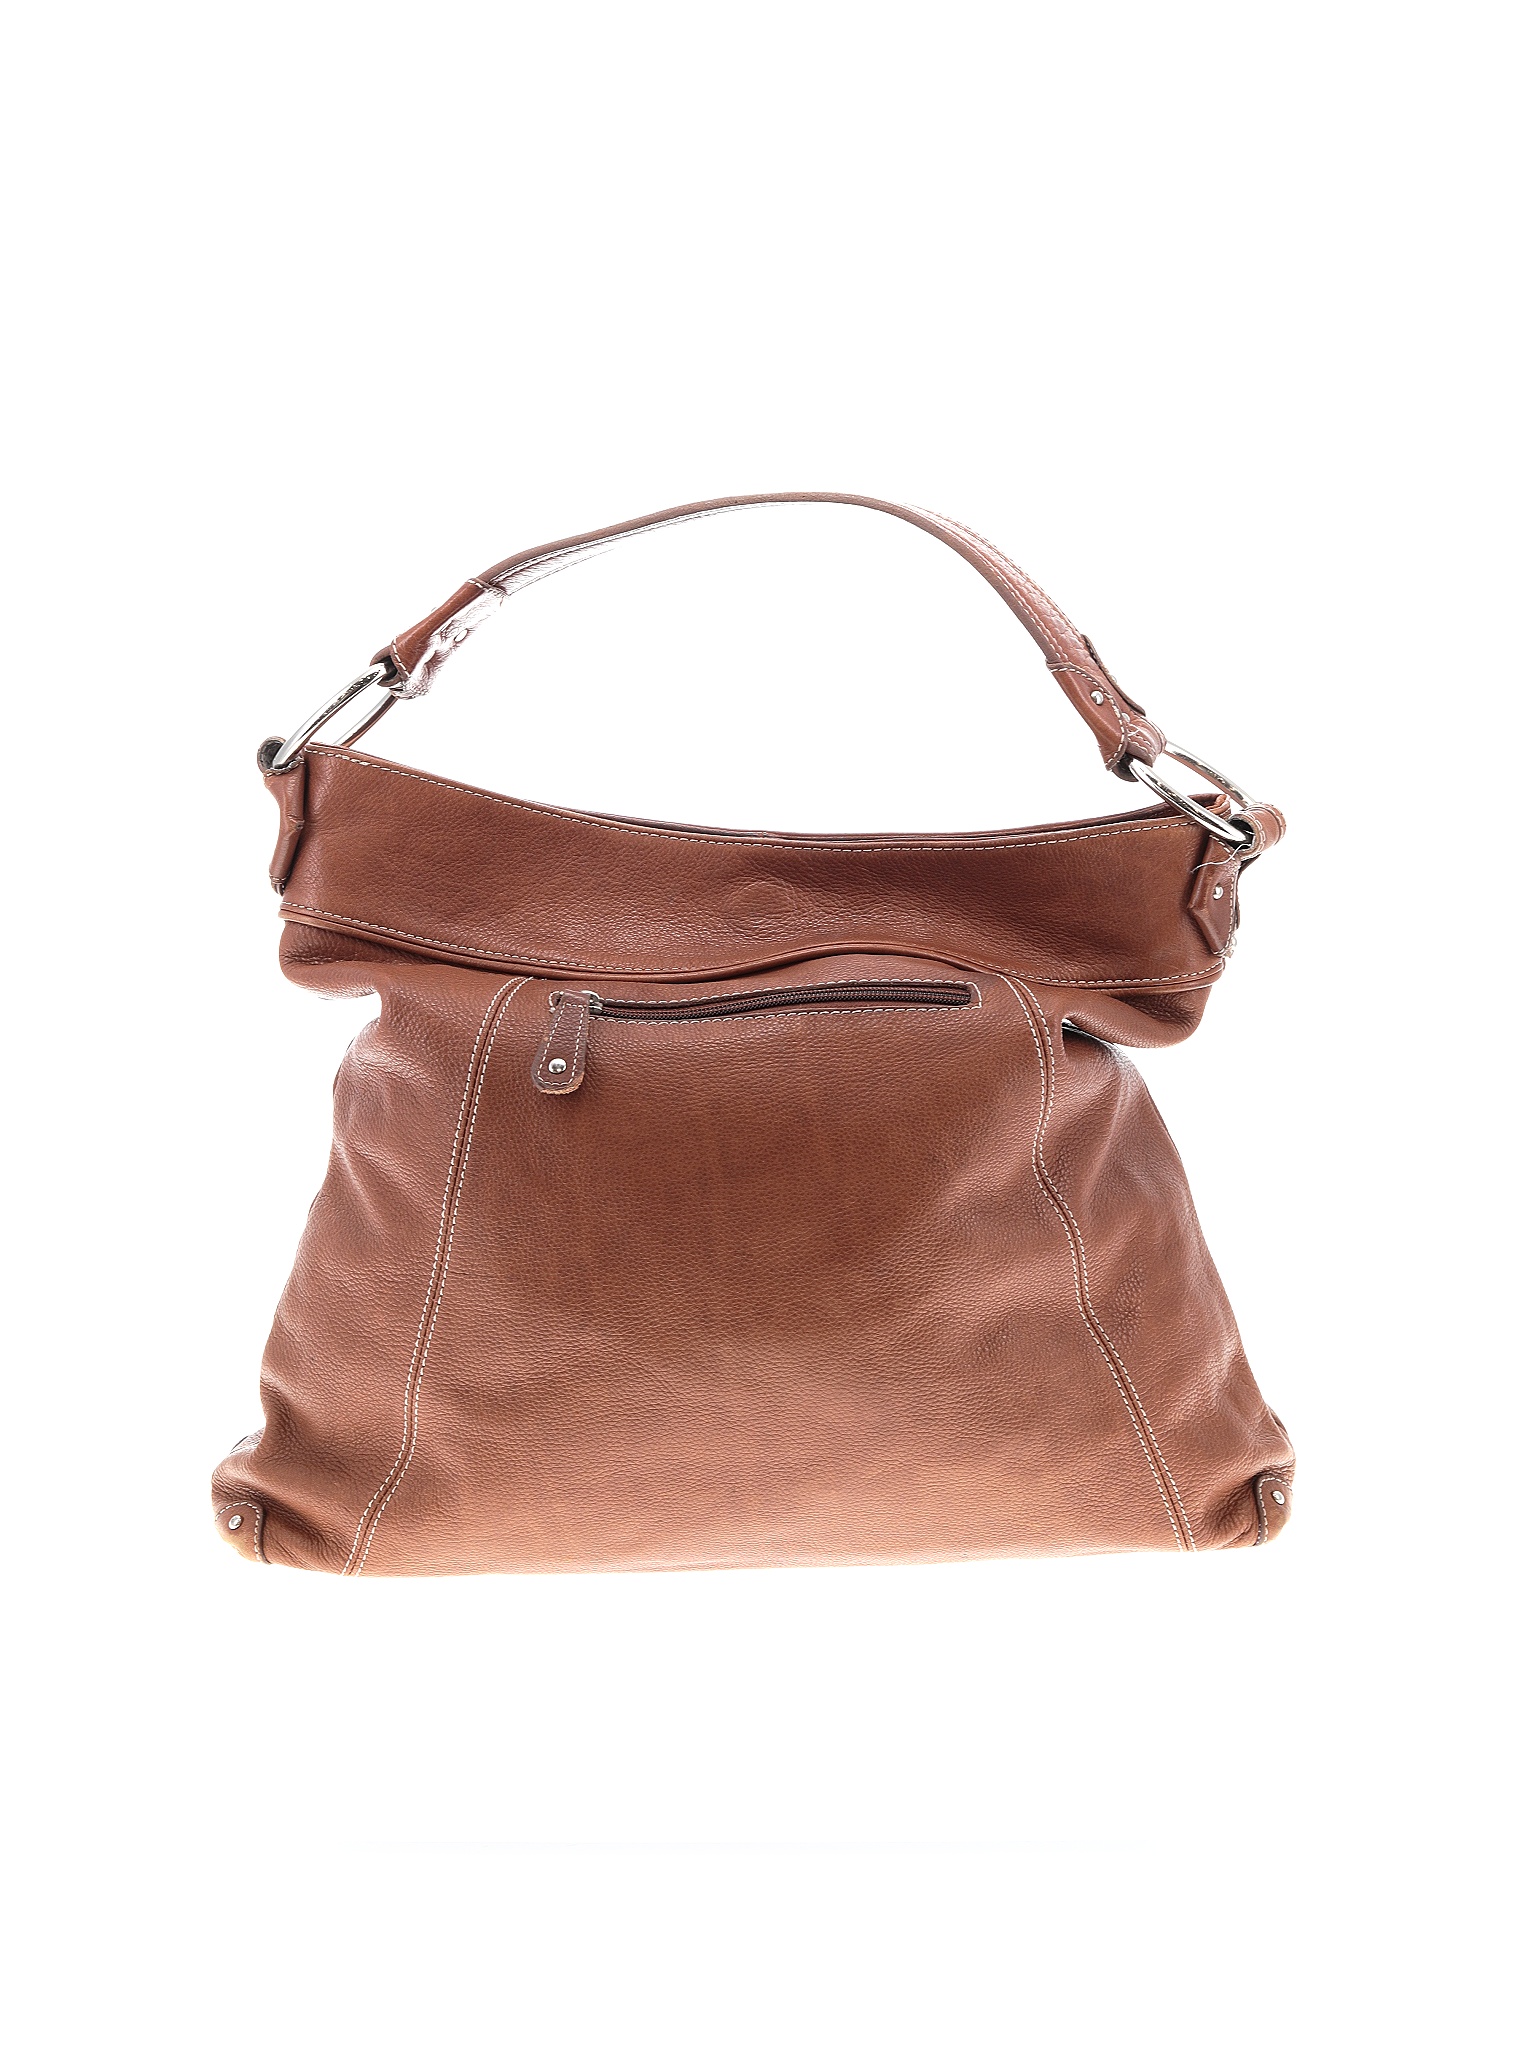 Clarks Handbags On Up To 90% Retail